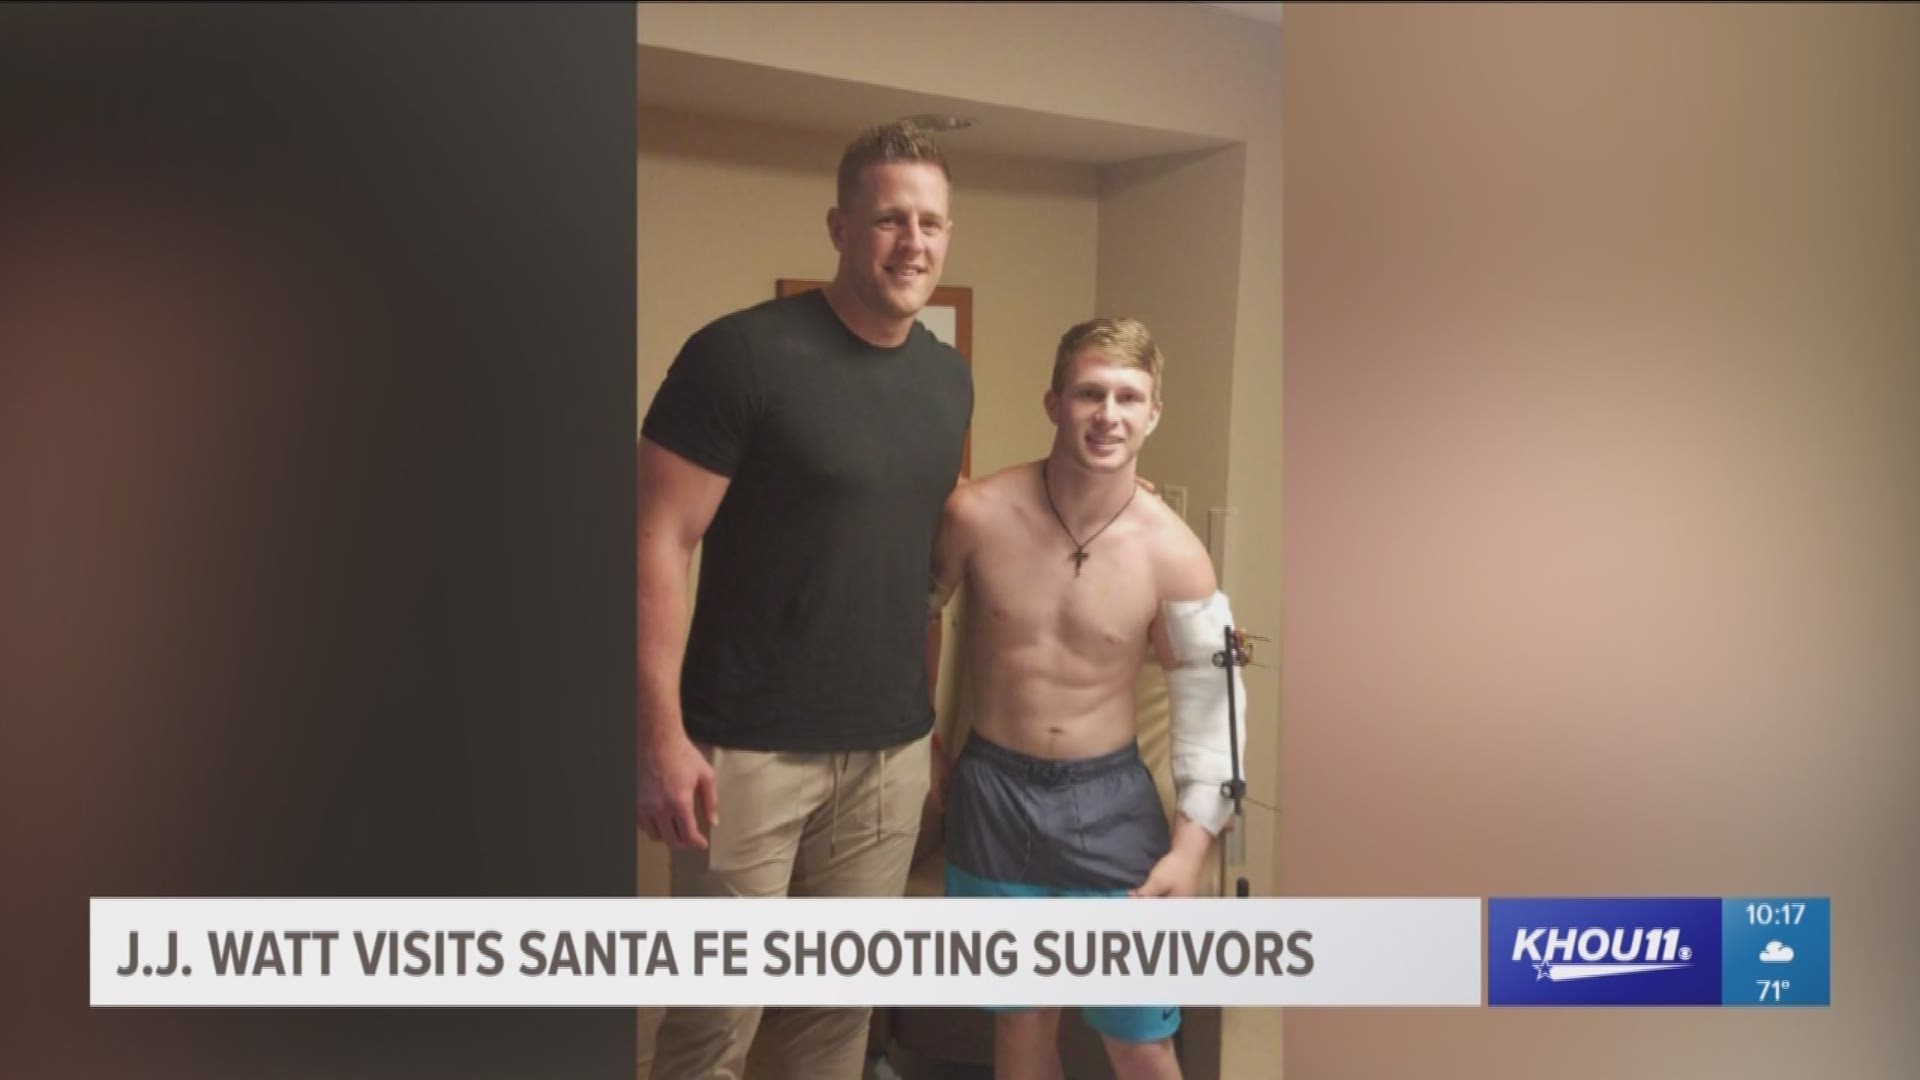 Some of the Santa Fe shooting survivors are getting a much-needed pick-me-up with a visit from one of Houston's heroes.